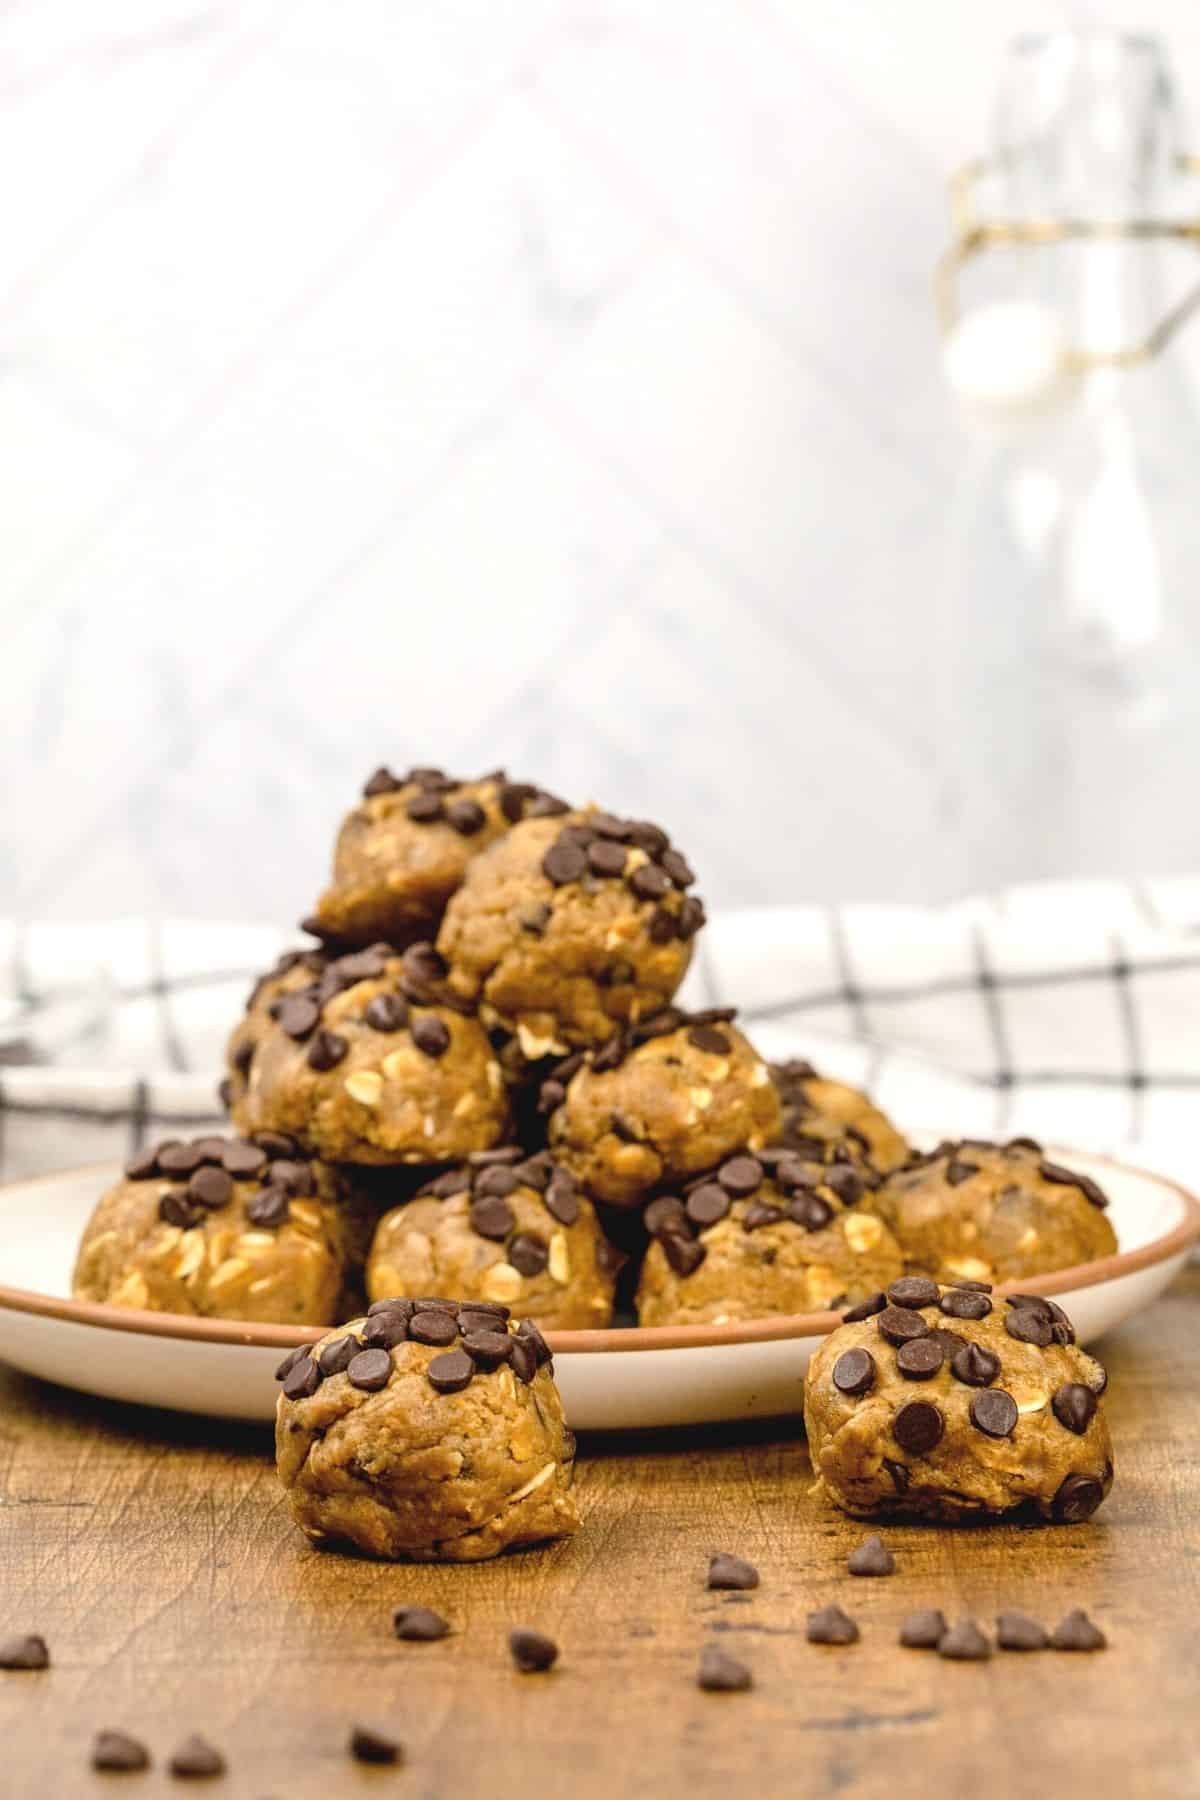 A pile of no bake chocolate chip cookie dough balls on a beige plate on a wood table in the kitchen. A towel and glass jar are blurred in the background. Mini chocolate chips are sprinkled around. The focus in on the two dough balls in front of the plate.